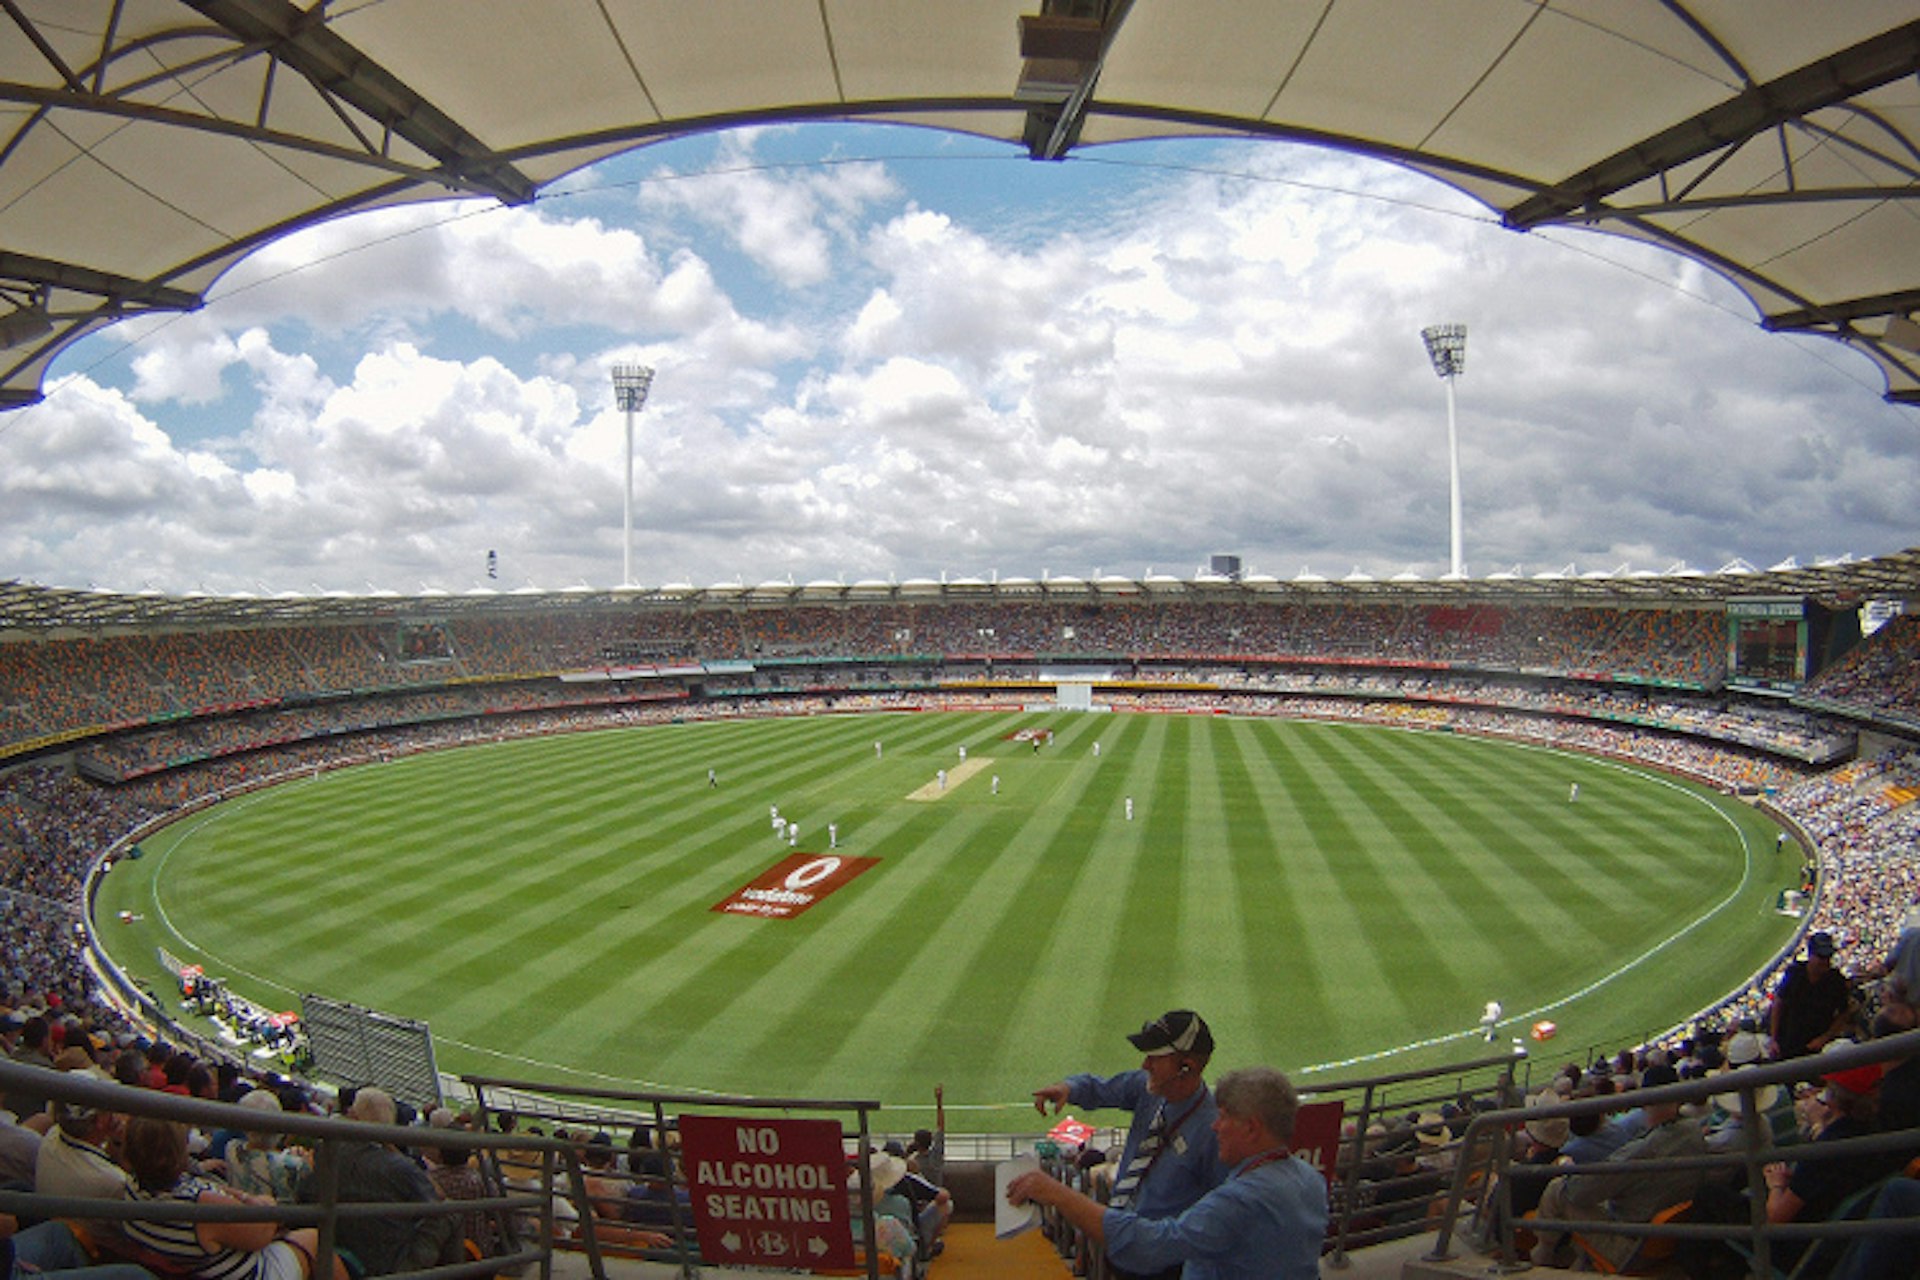 The Brisbane Cricket Ground affectionately referred to as The Gabba. Image by Rae Allen // CC BY 2.0